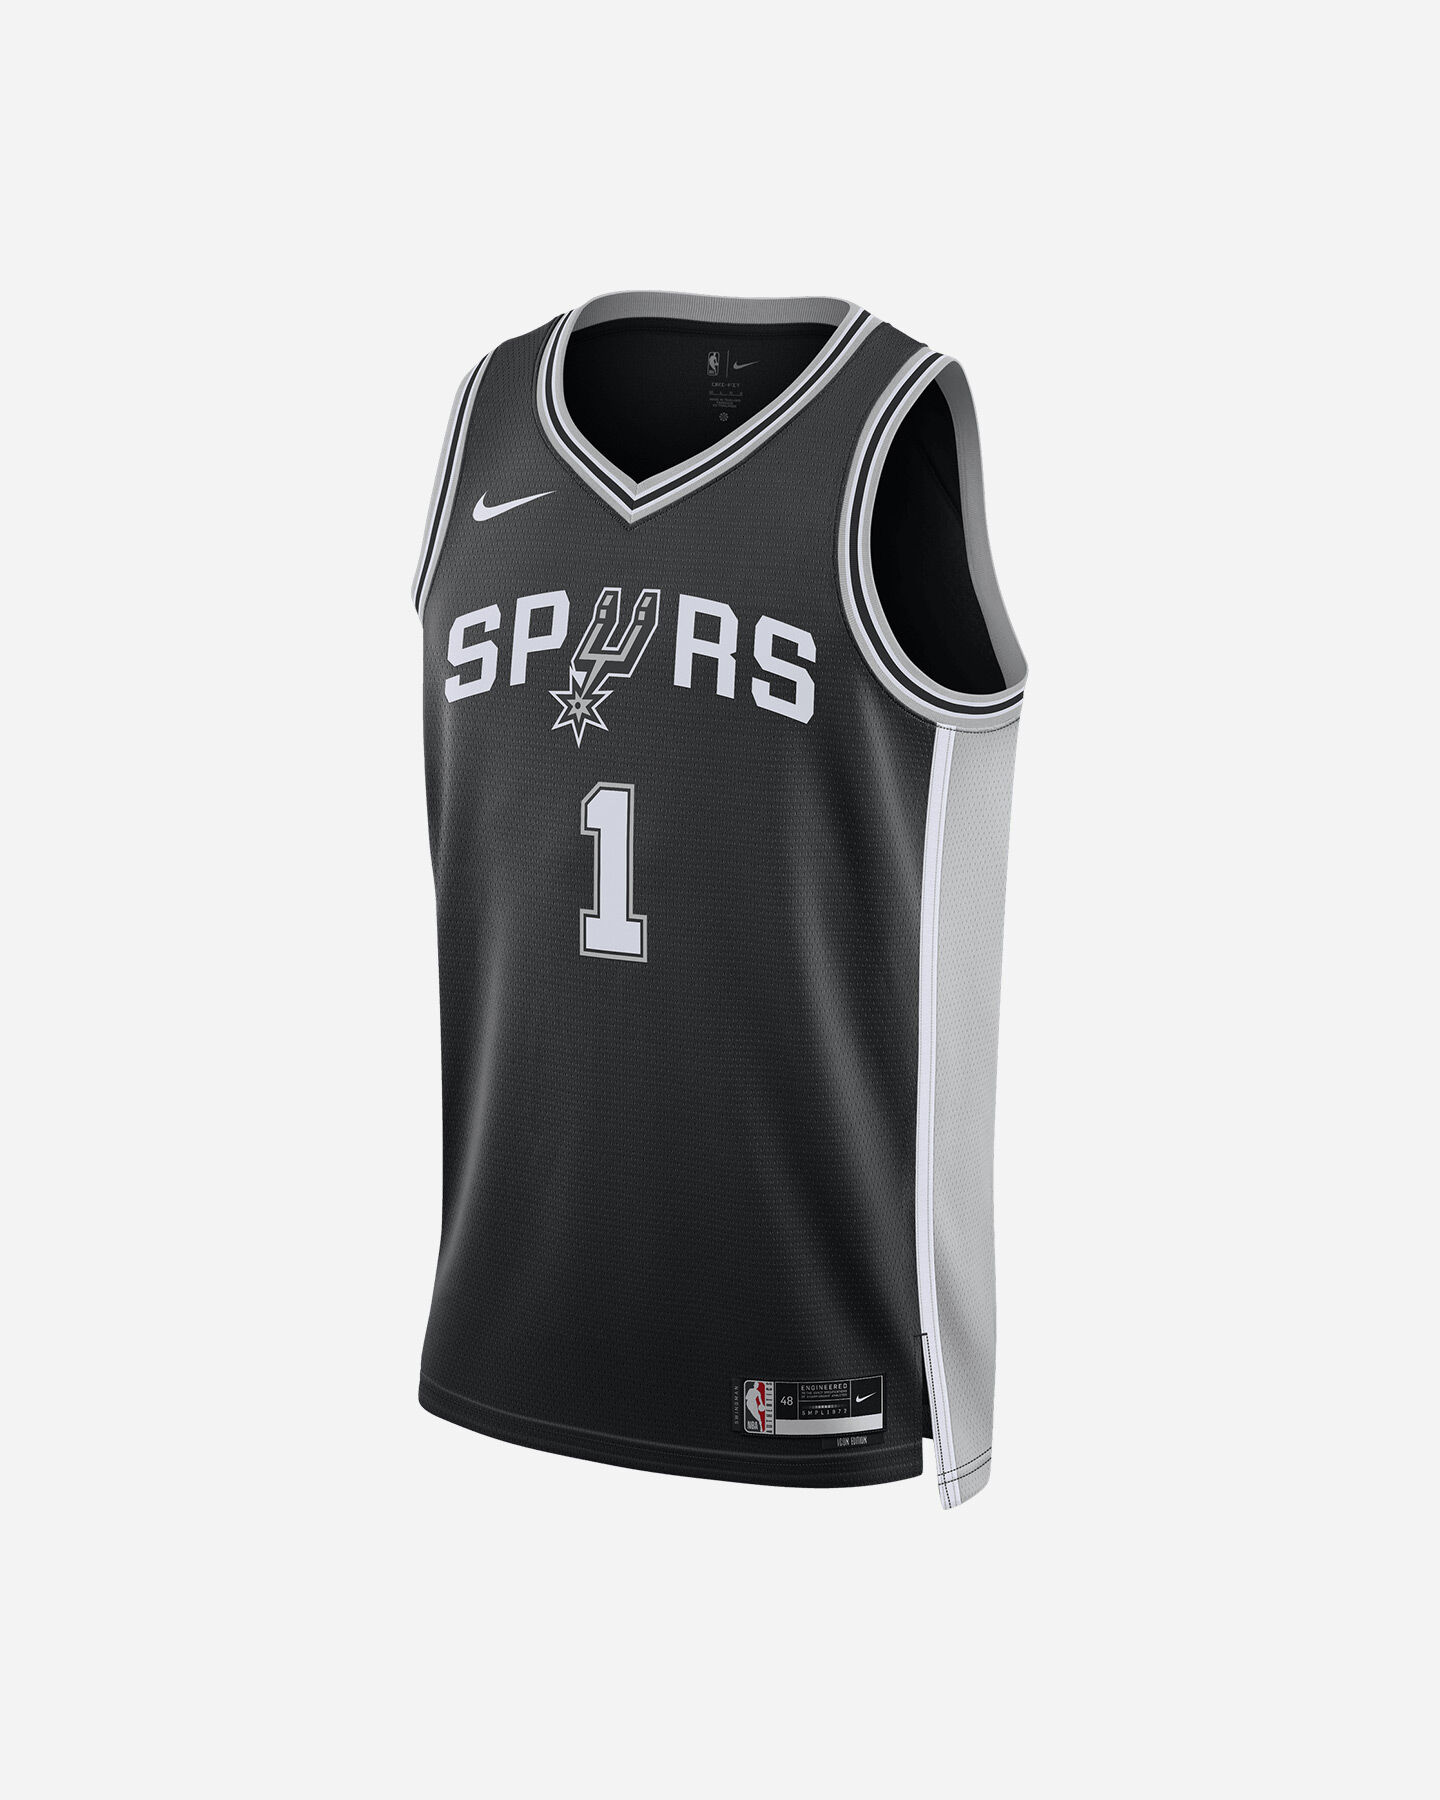  Canotta basket NIKE ICON SPURS WEMBAYANA SWING 22 M S5689416|015|S scatto 0